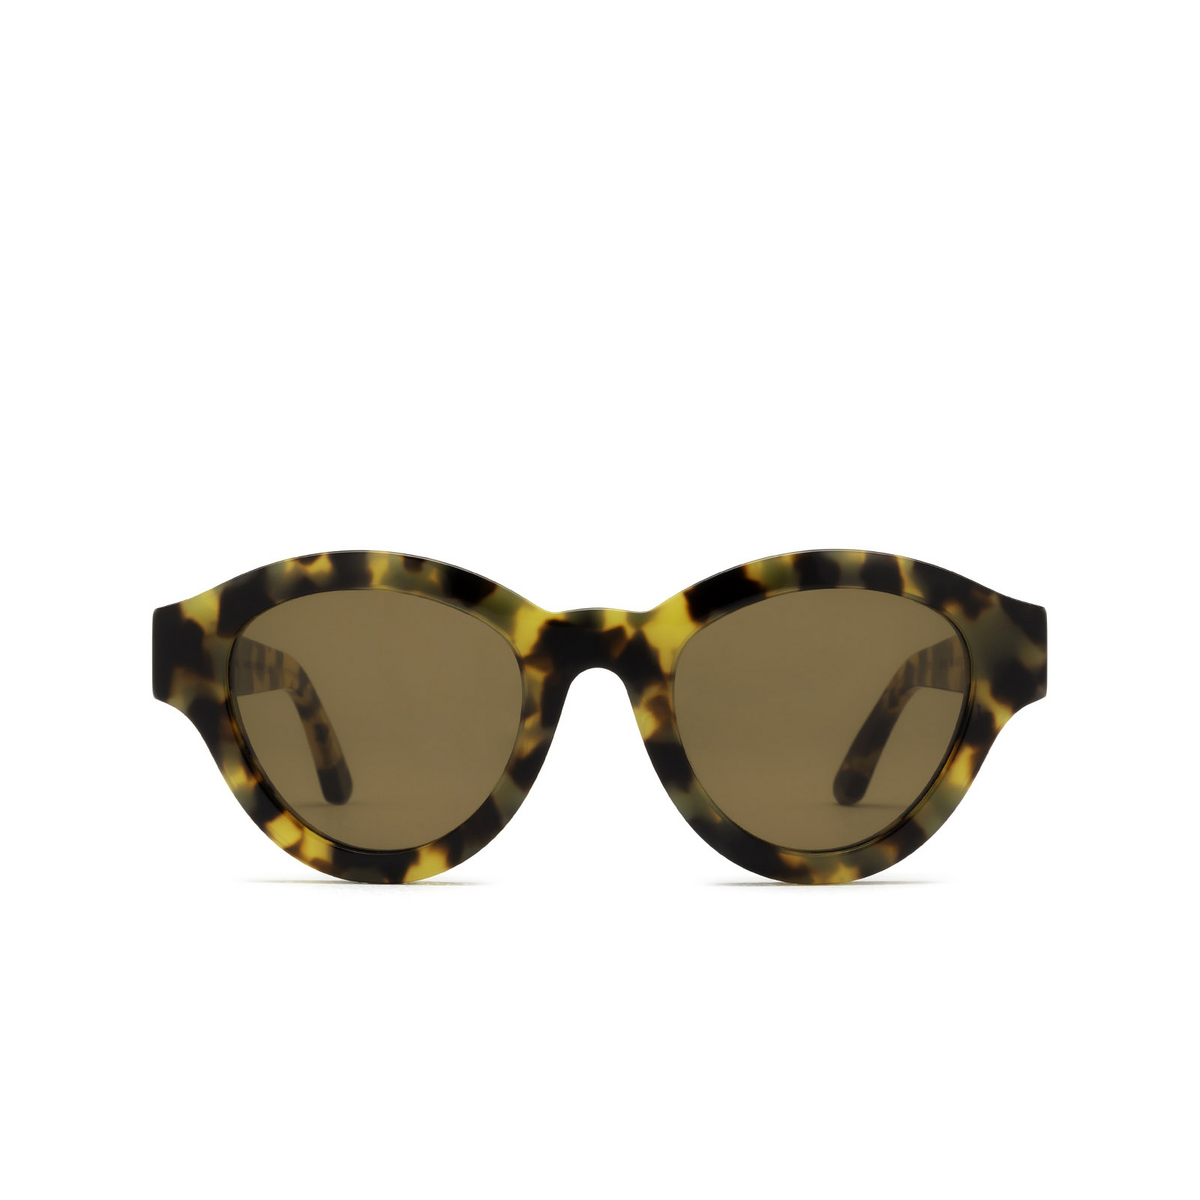 Huma® Cat-eye Sunglasses: Dug color Maculate 19 - front view.